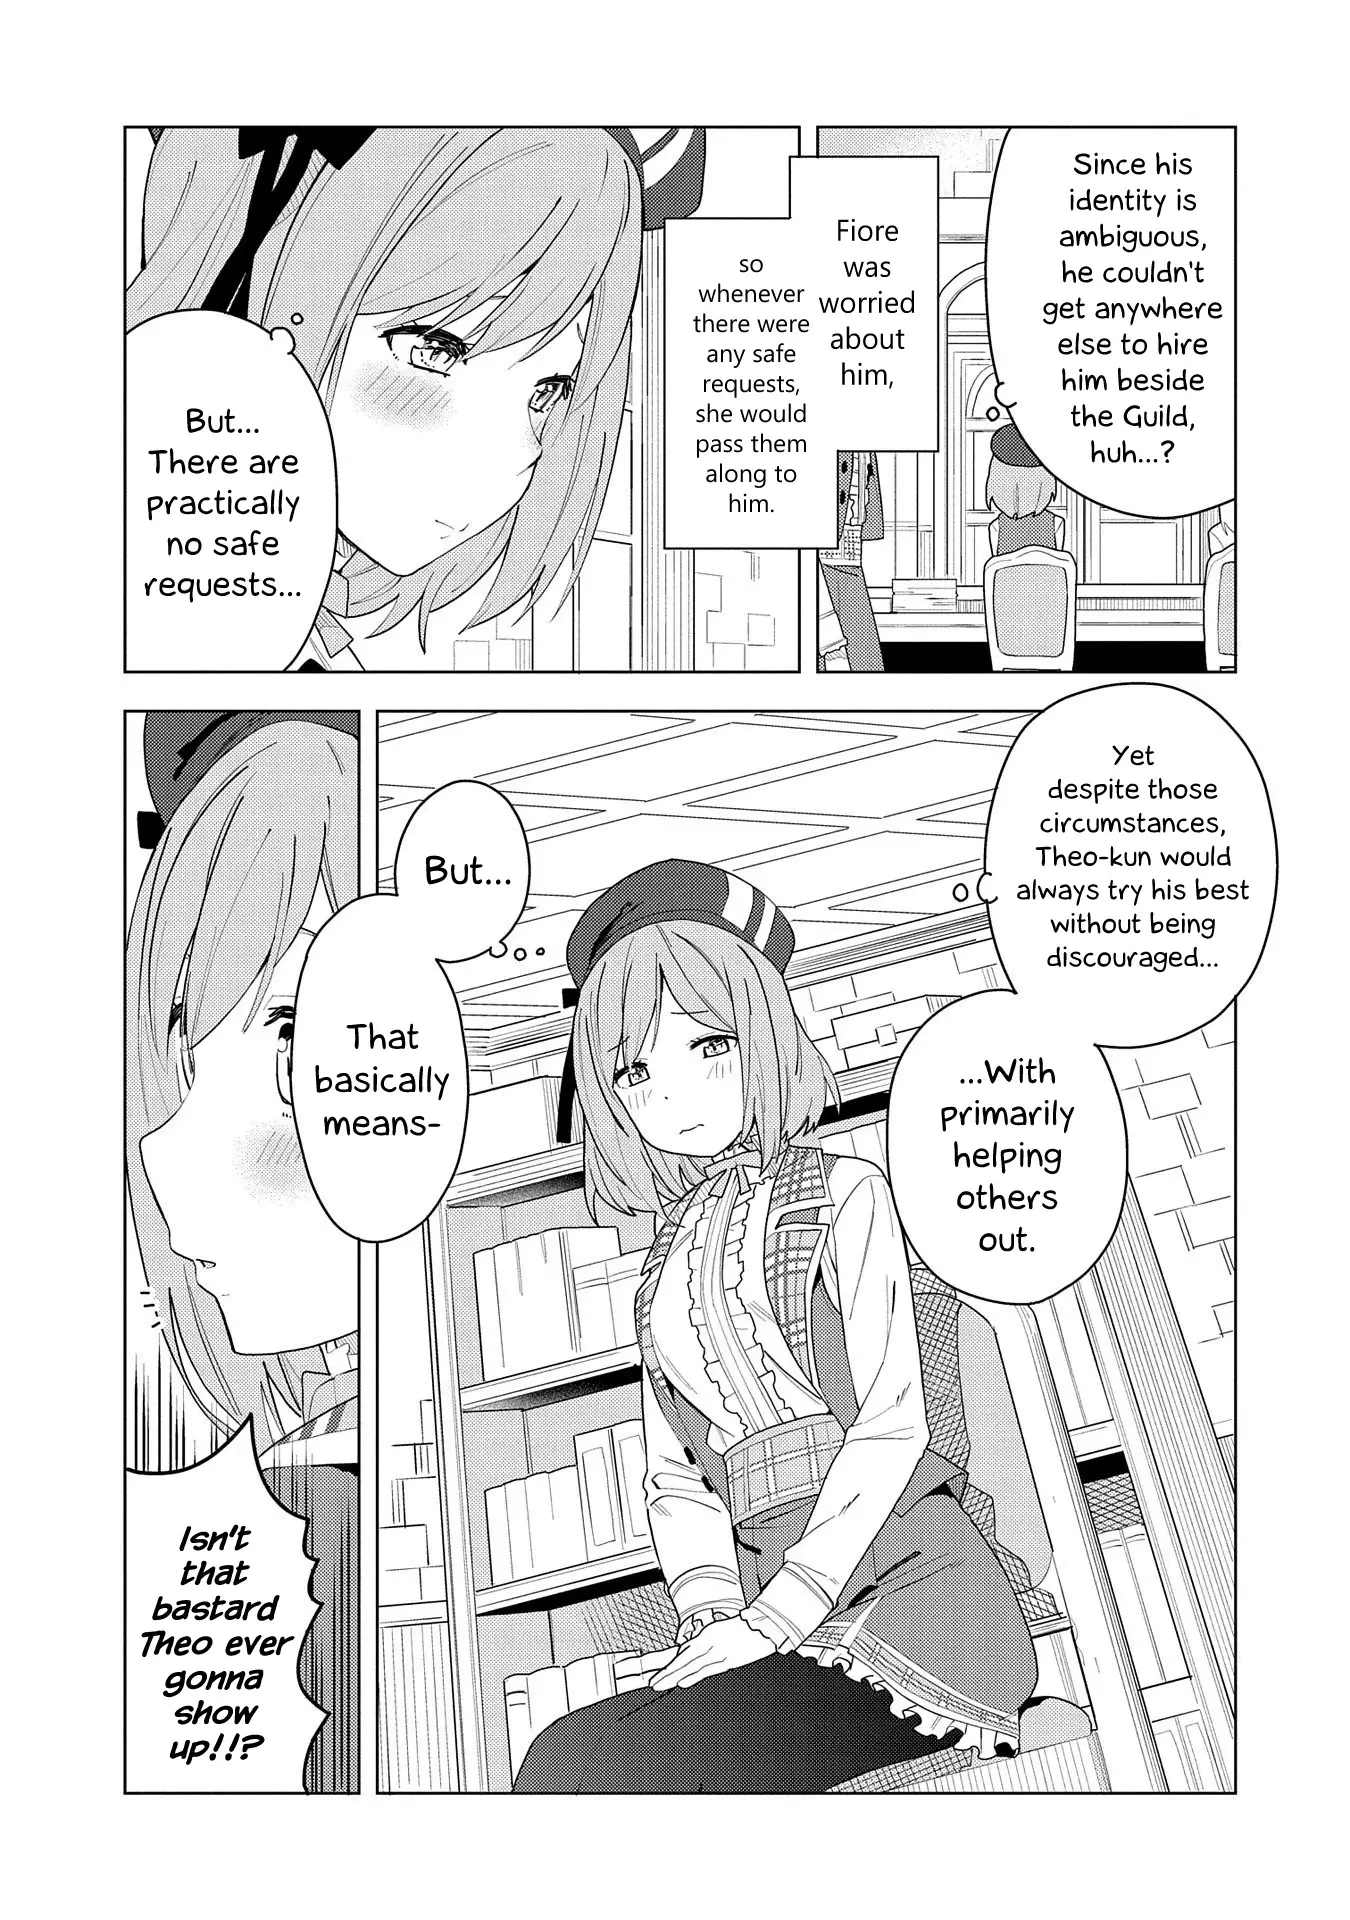 I Summoned The Devil To Grant Me A Wish, But I Married Her Instead Since She Was Adorable ~My New Devil Wife~ - 2 page 5